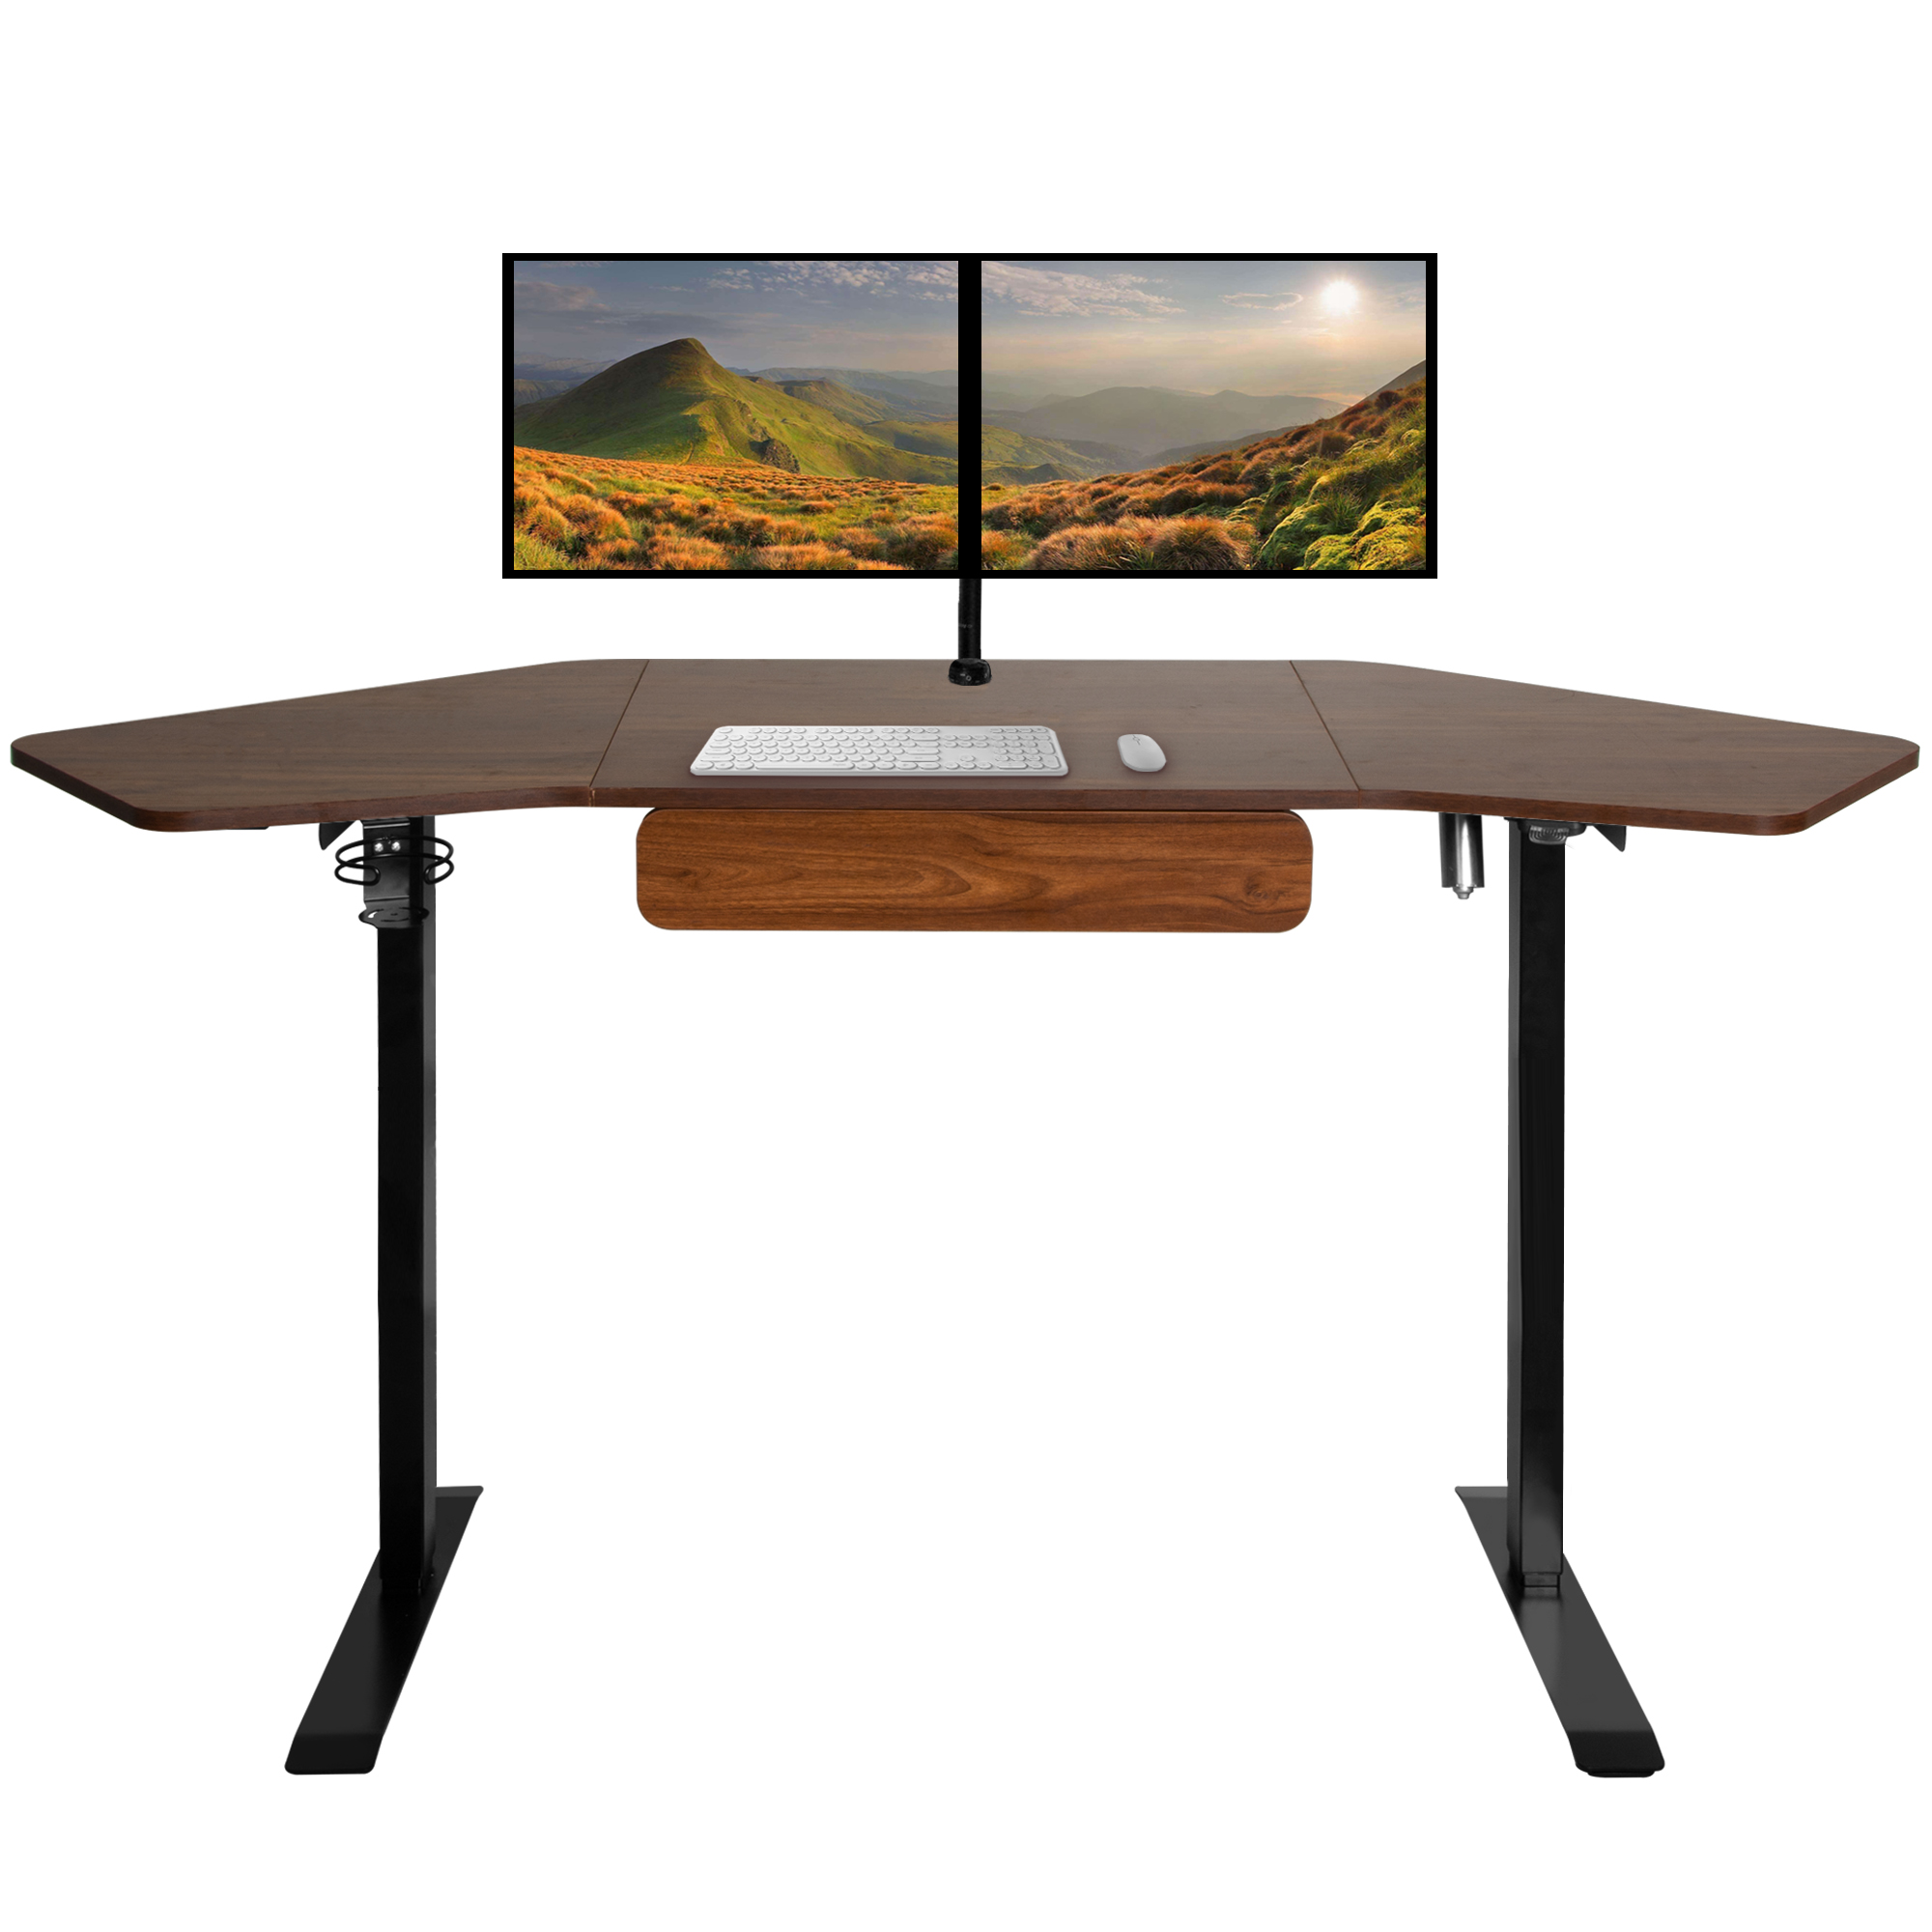 71” Electric Standing Desk with LED Control Handle, Adjustable Height 